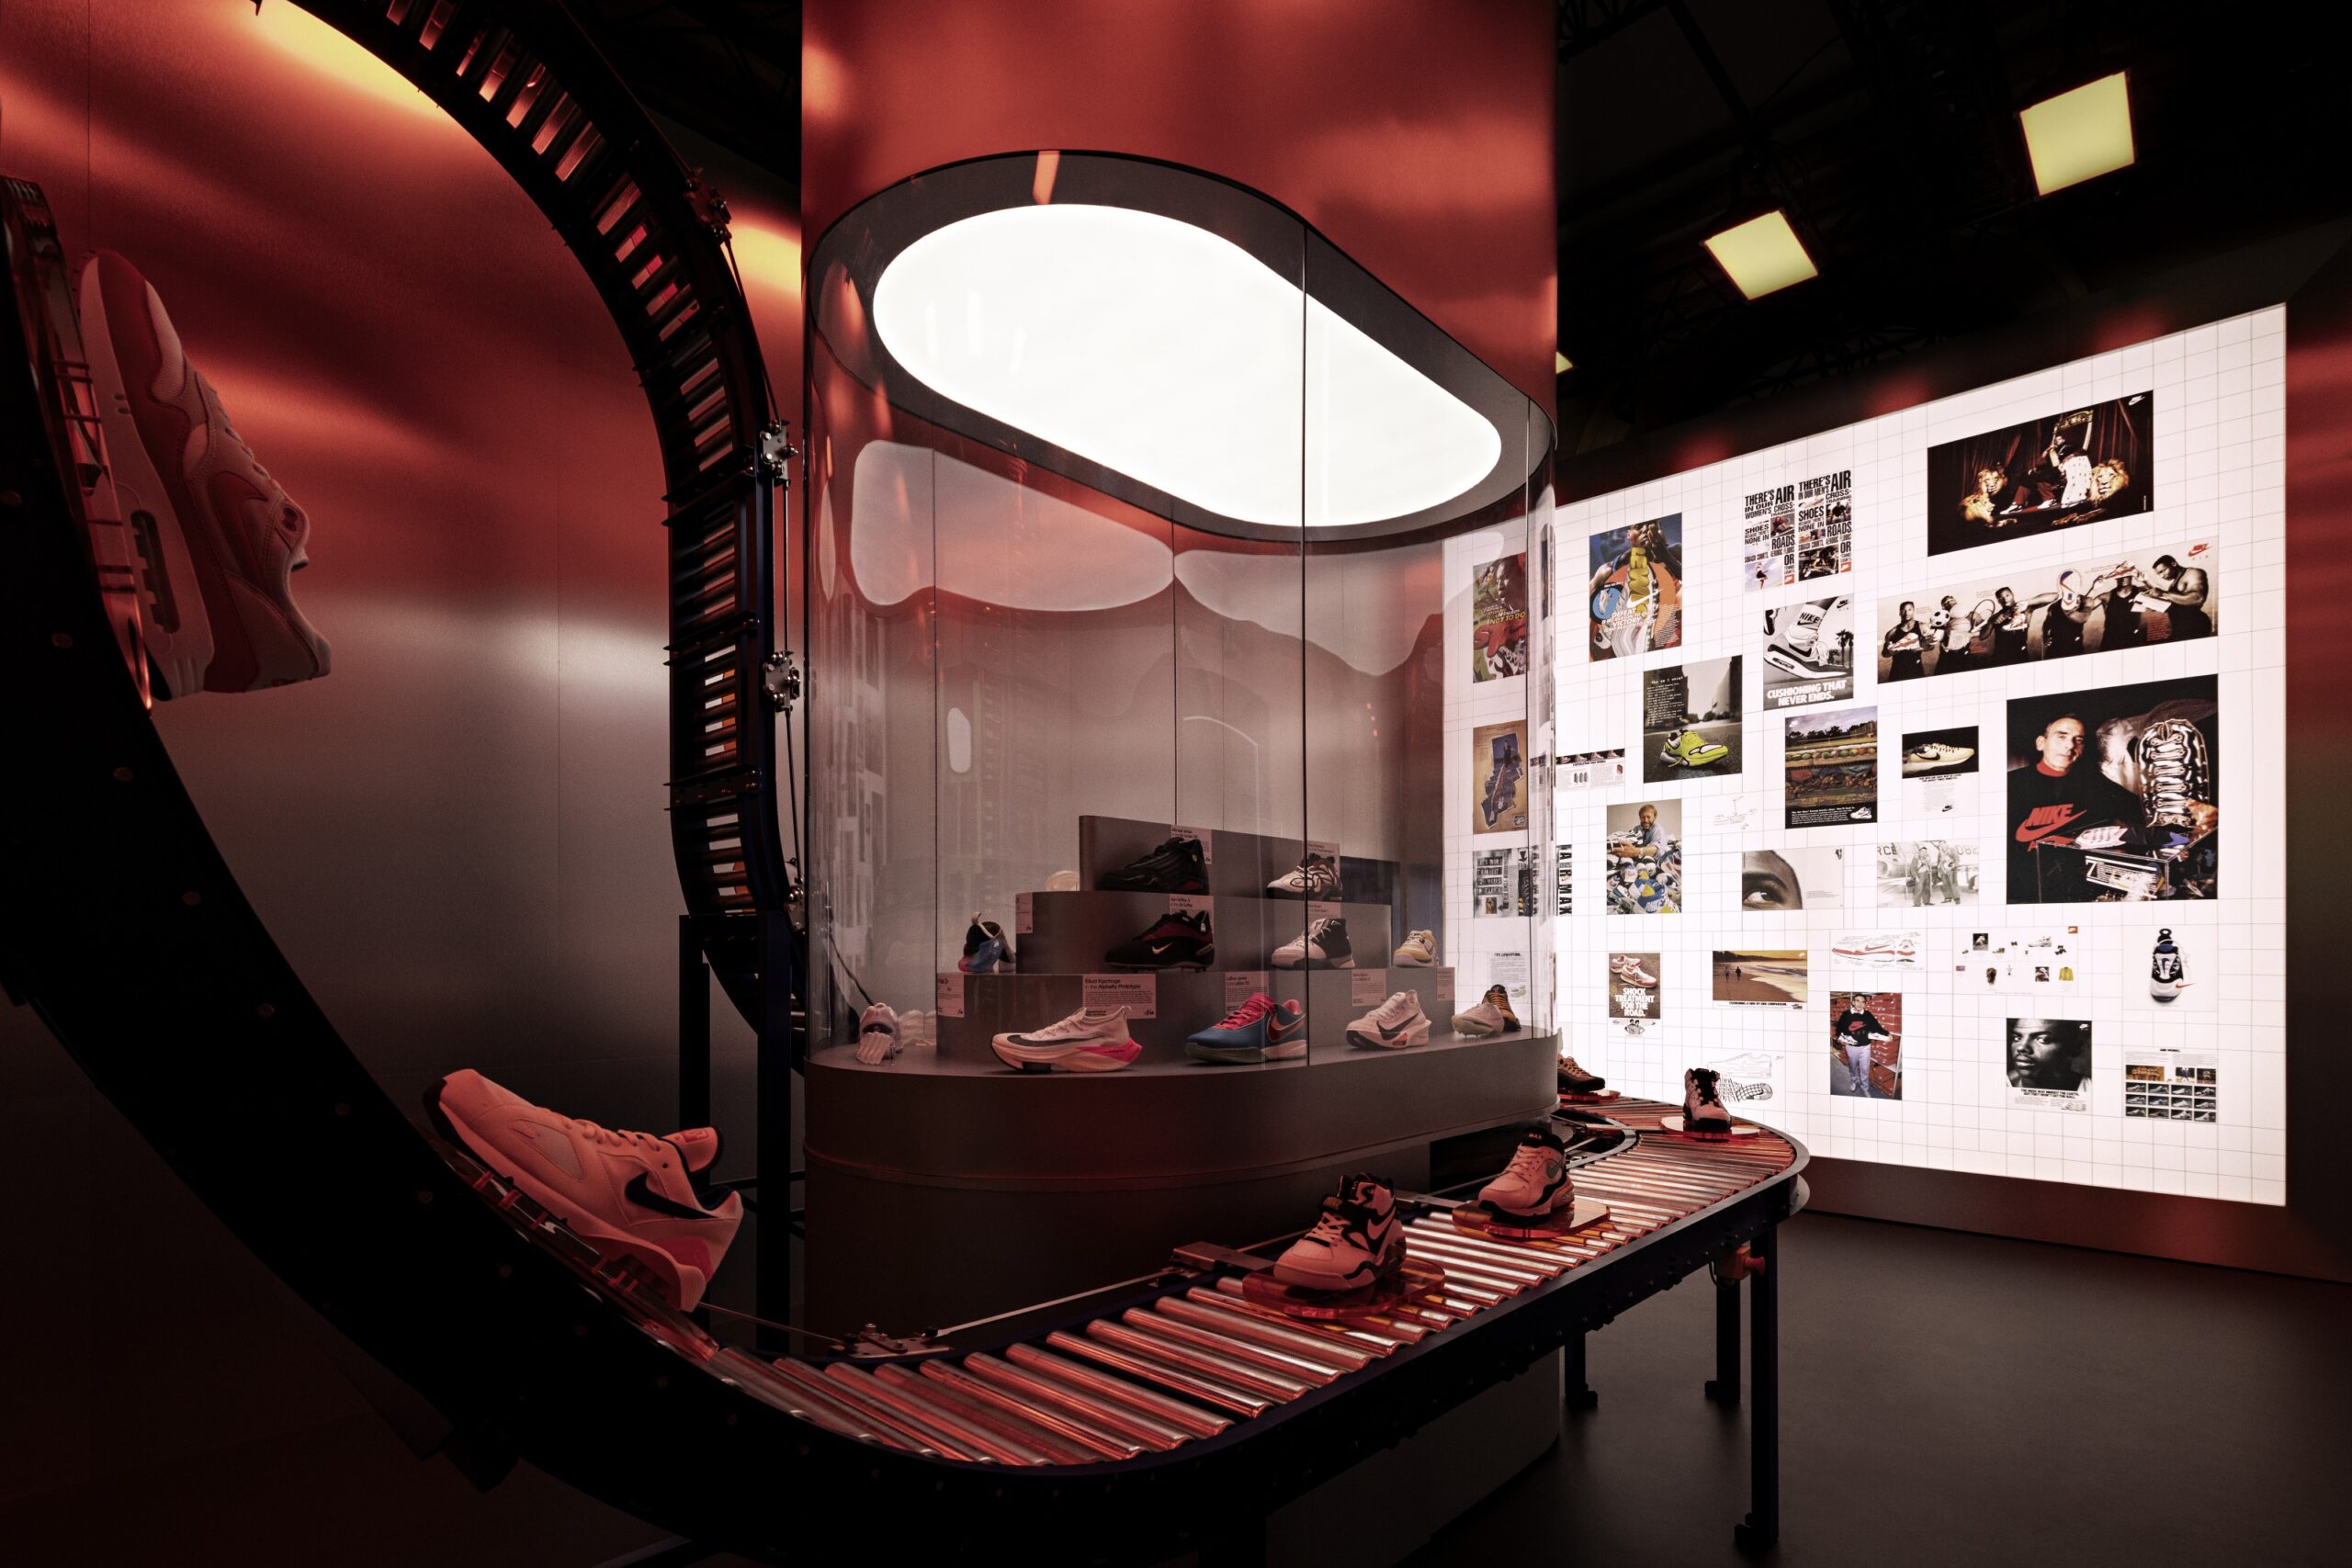 Nike On Air: Immersive Experience